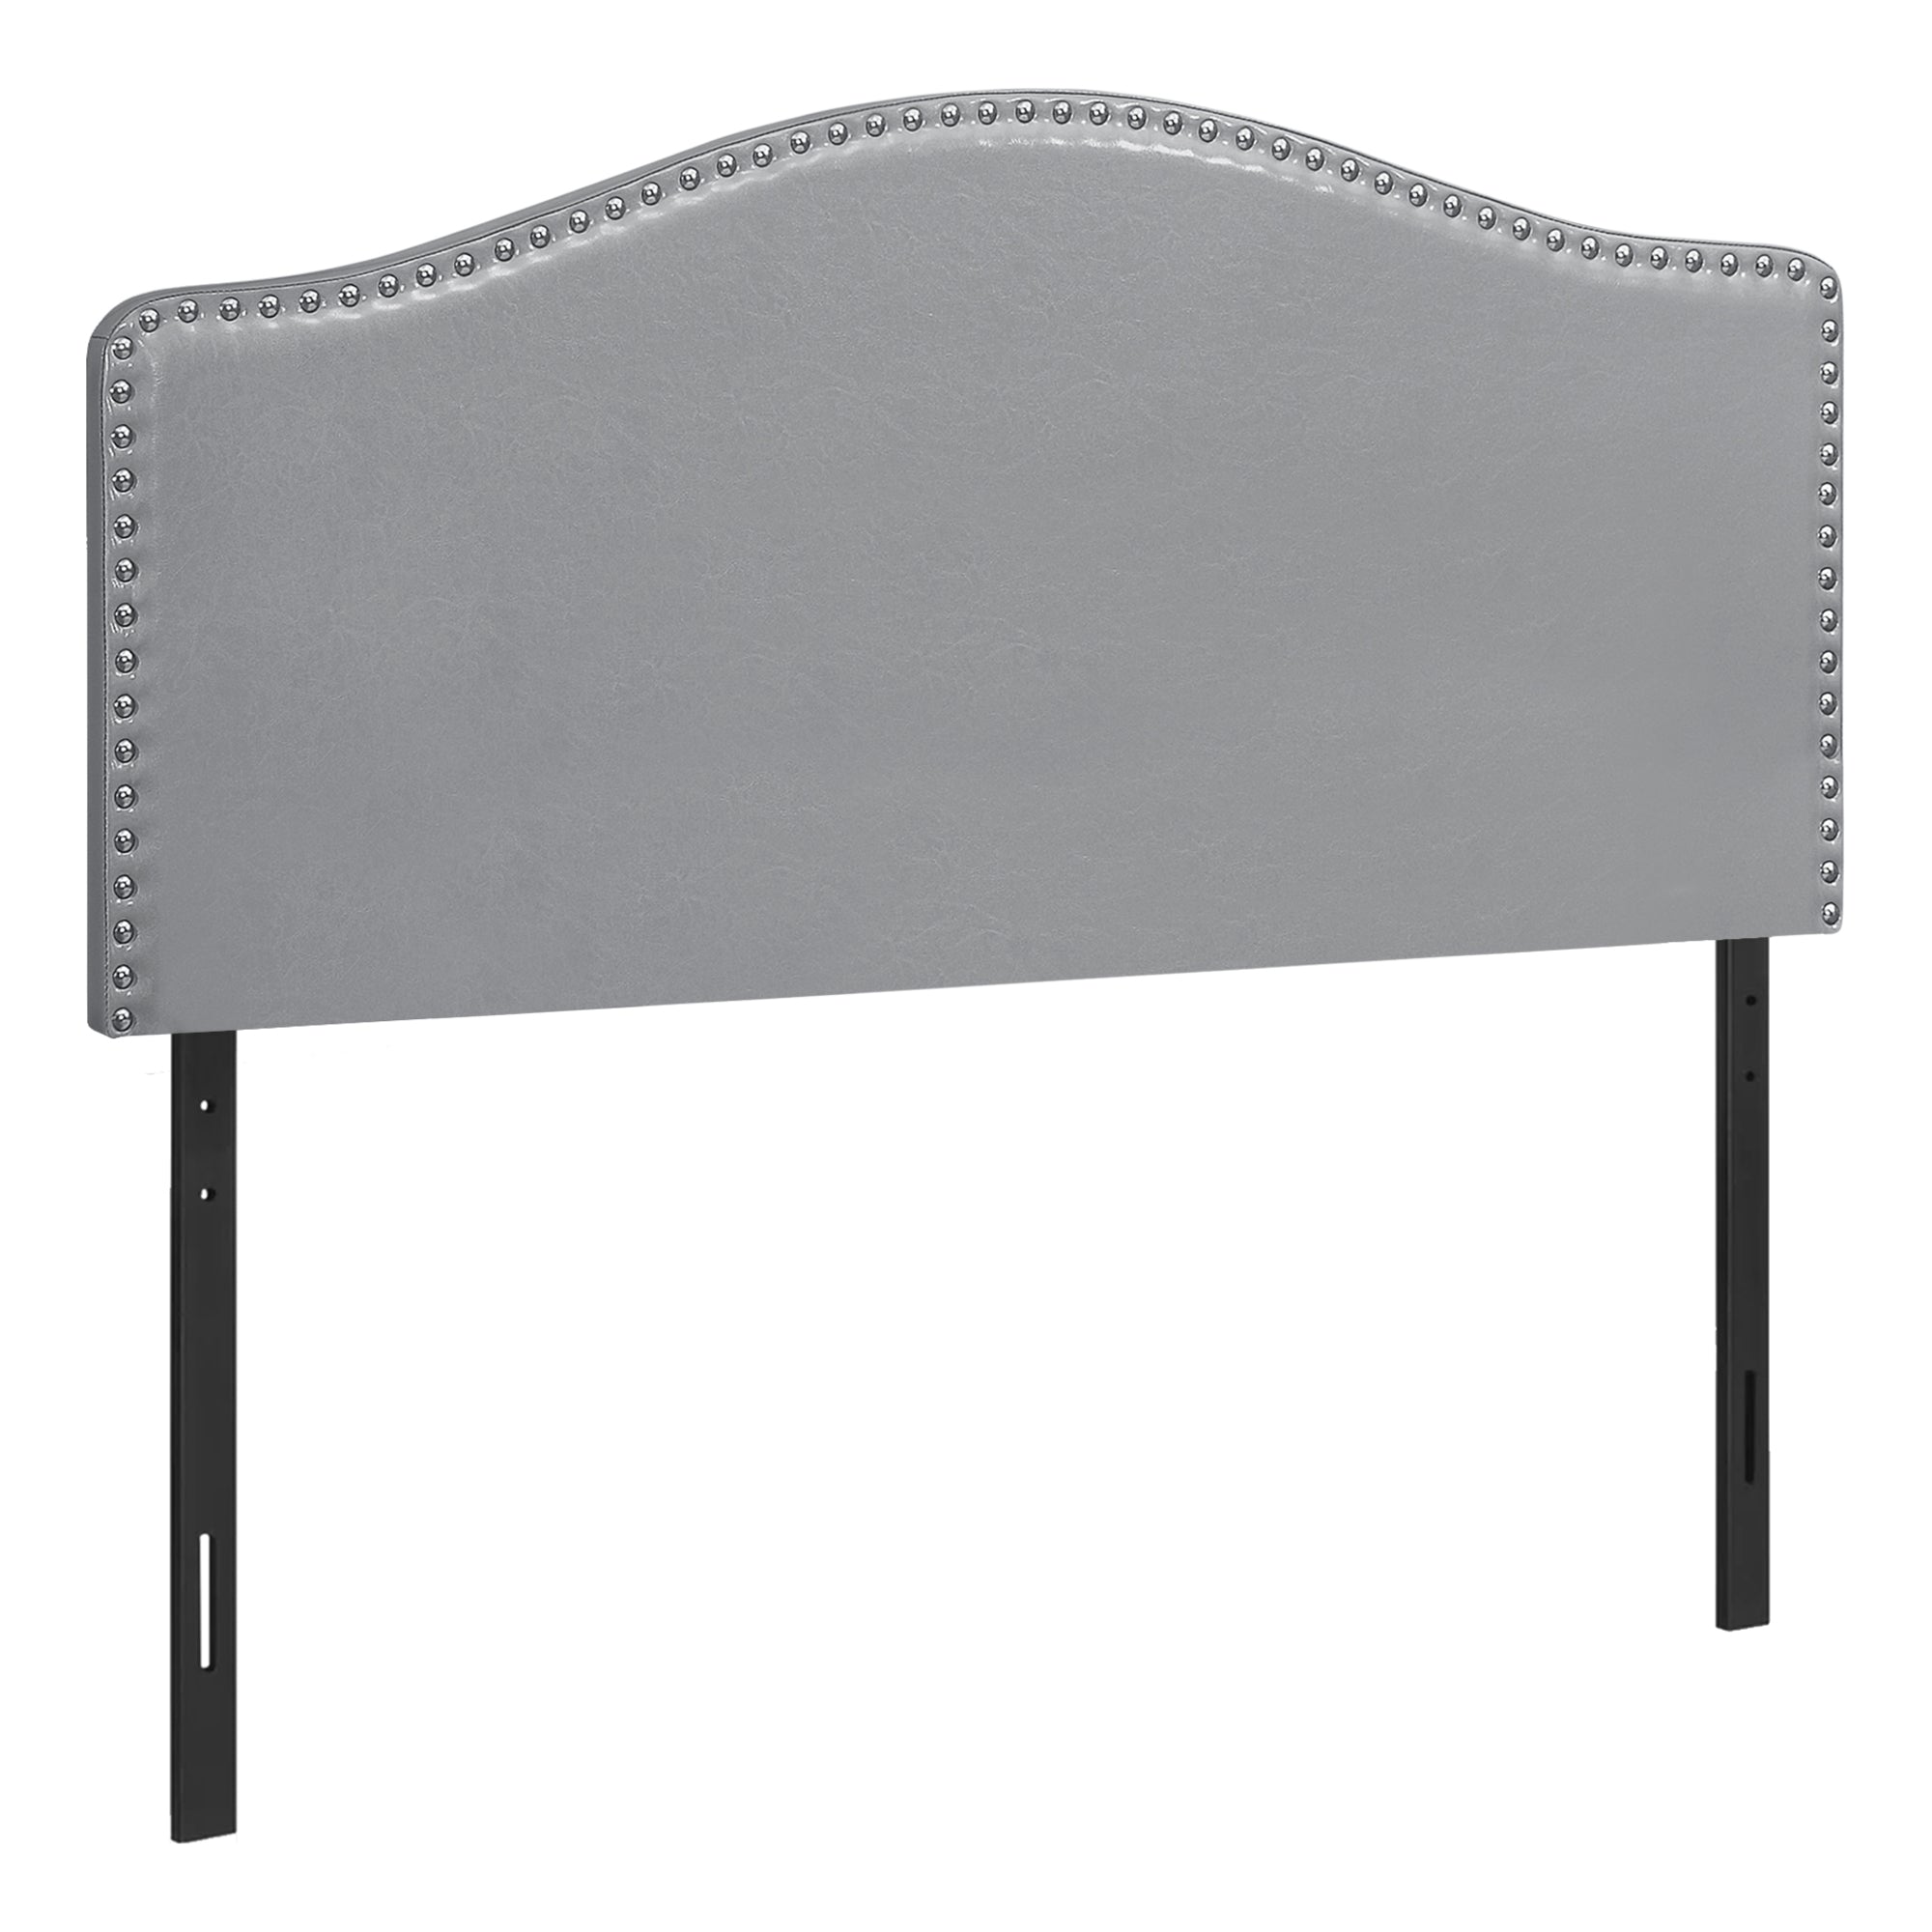 MN-496011F    Headboard, Bedroom, Full Size, Upholstered, Leather Look, Wooden Frame, Grey, Black, Contemporary, Modern